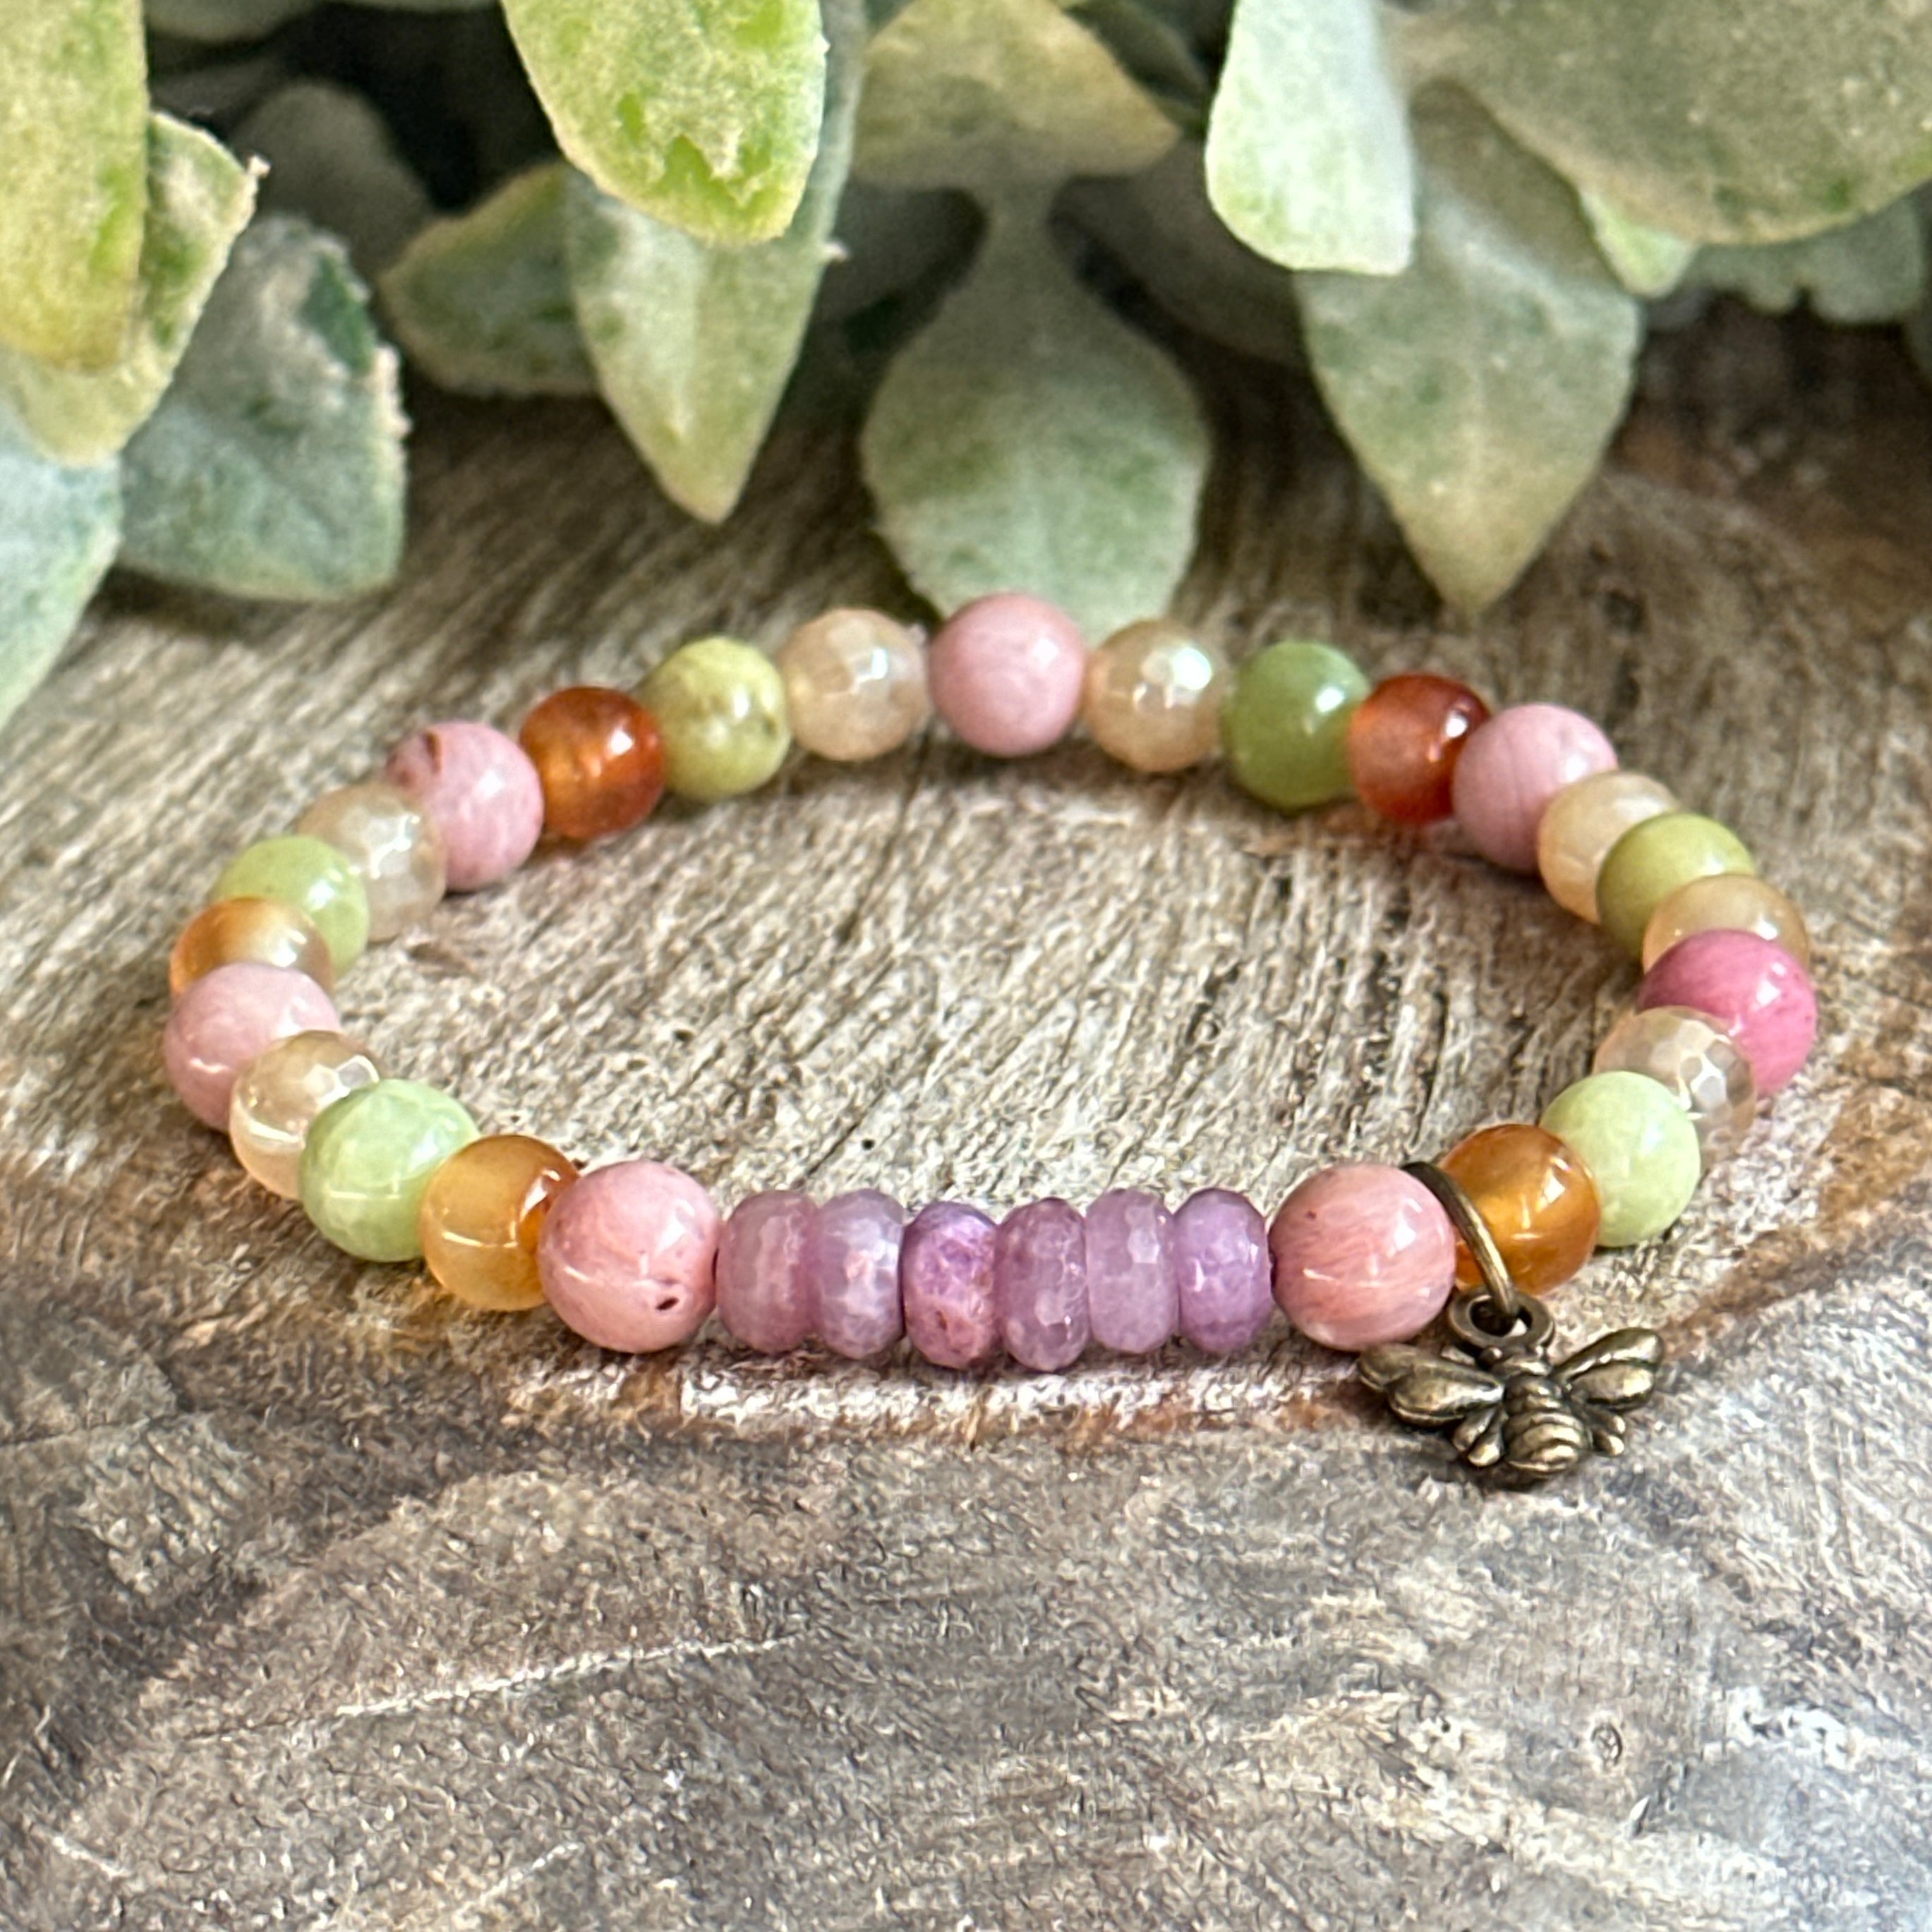 New Gemstone Crystal Healing Bracelets for Men and Women. Made in the USA, Yoga Bracelets